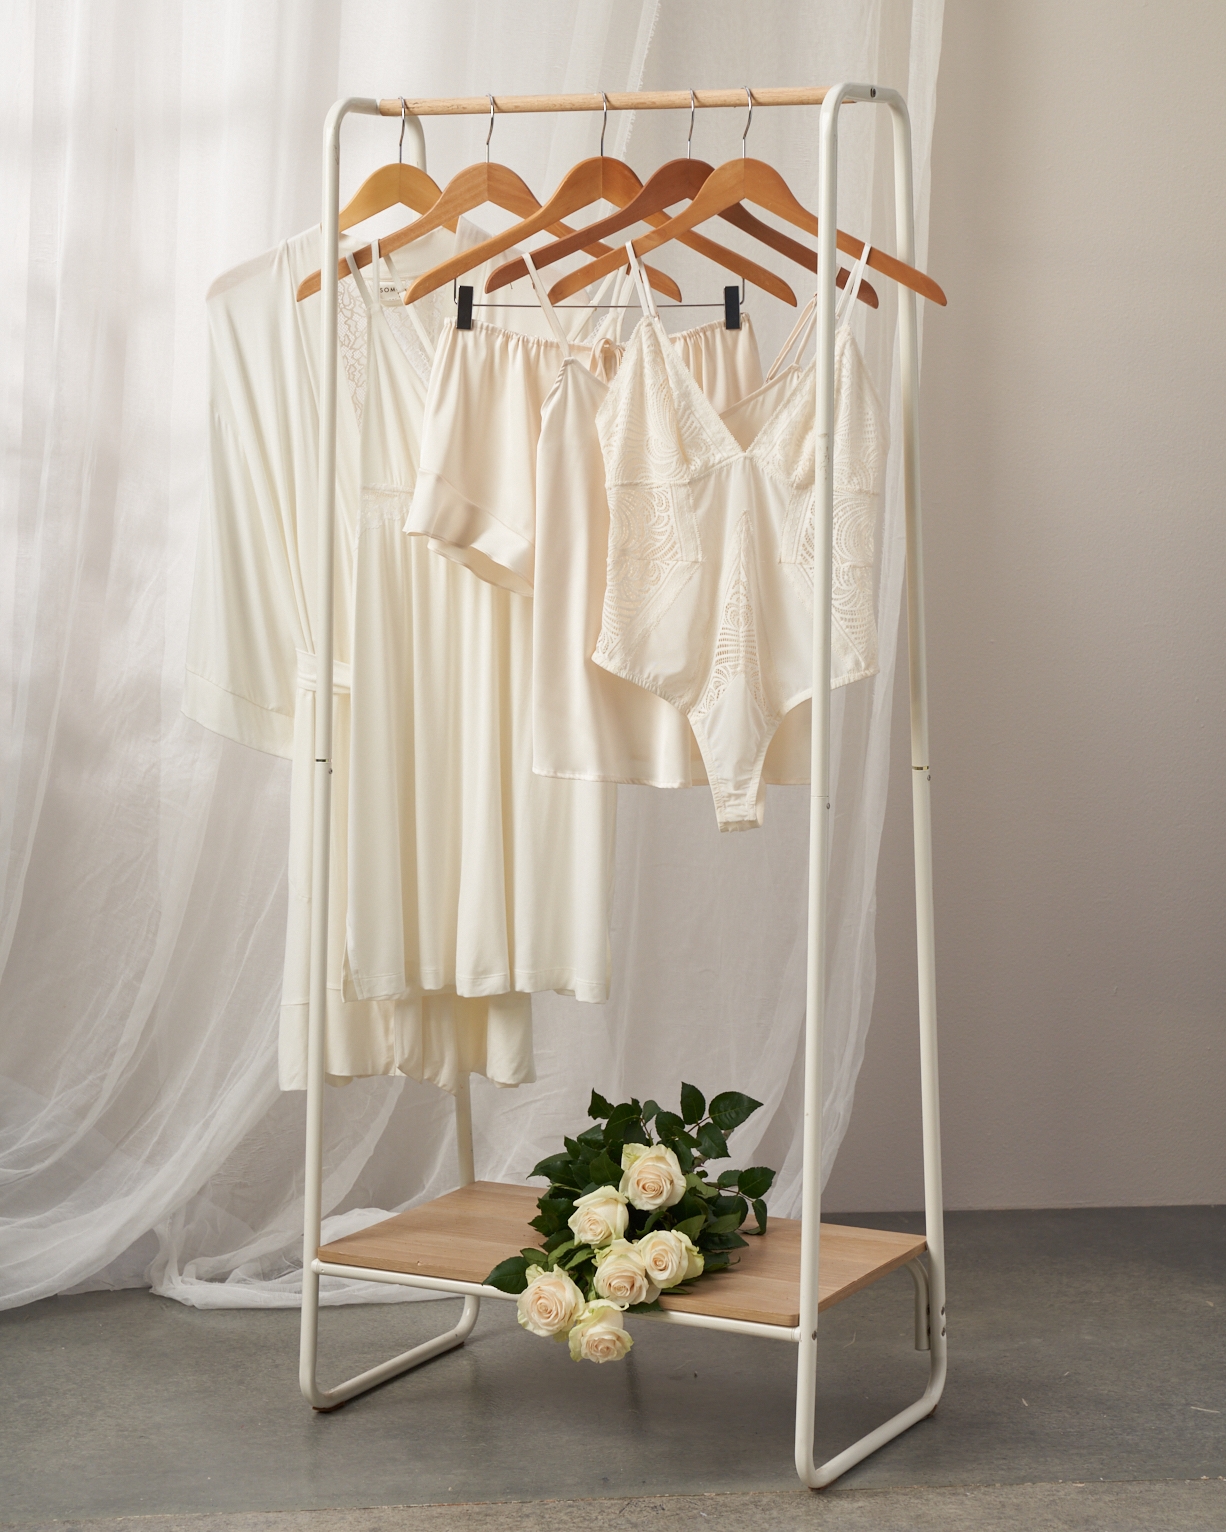 Soma<sup class=st-superscript>®</sup> women’s ivory bridal lingerie hanging on a rack and white roses in a bundle on the bottom shelf.